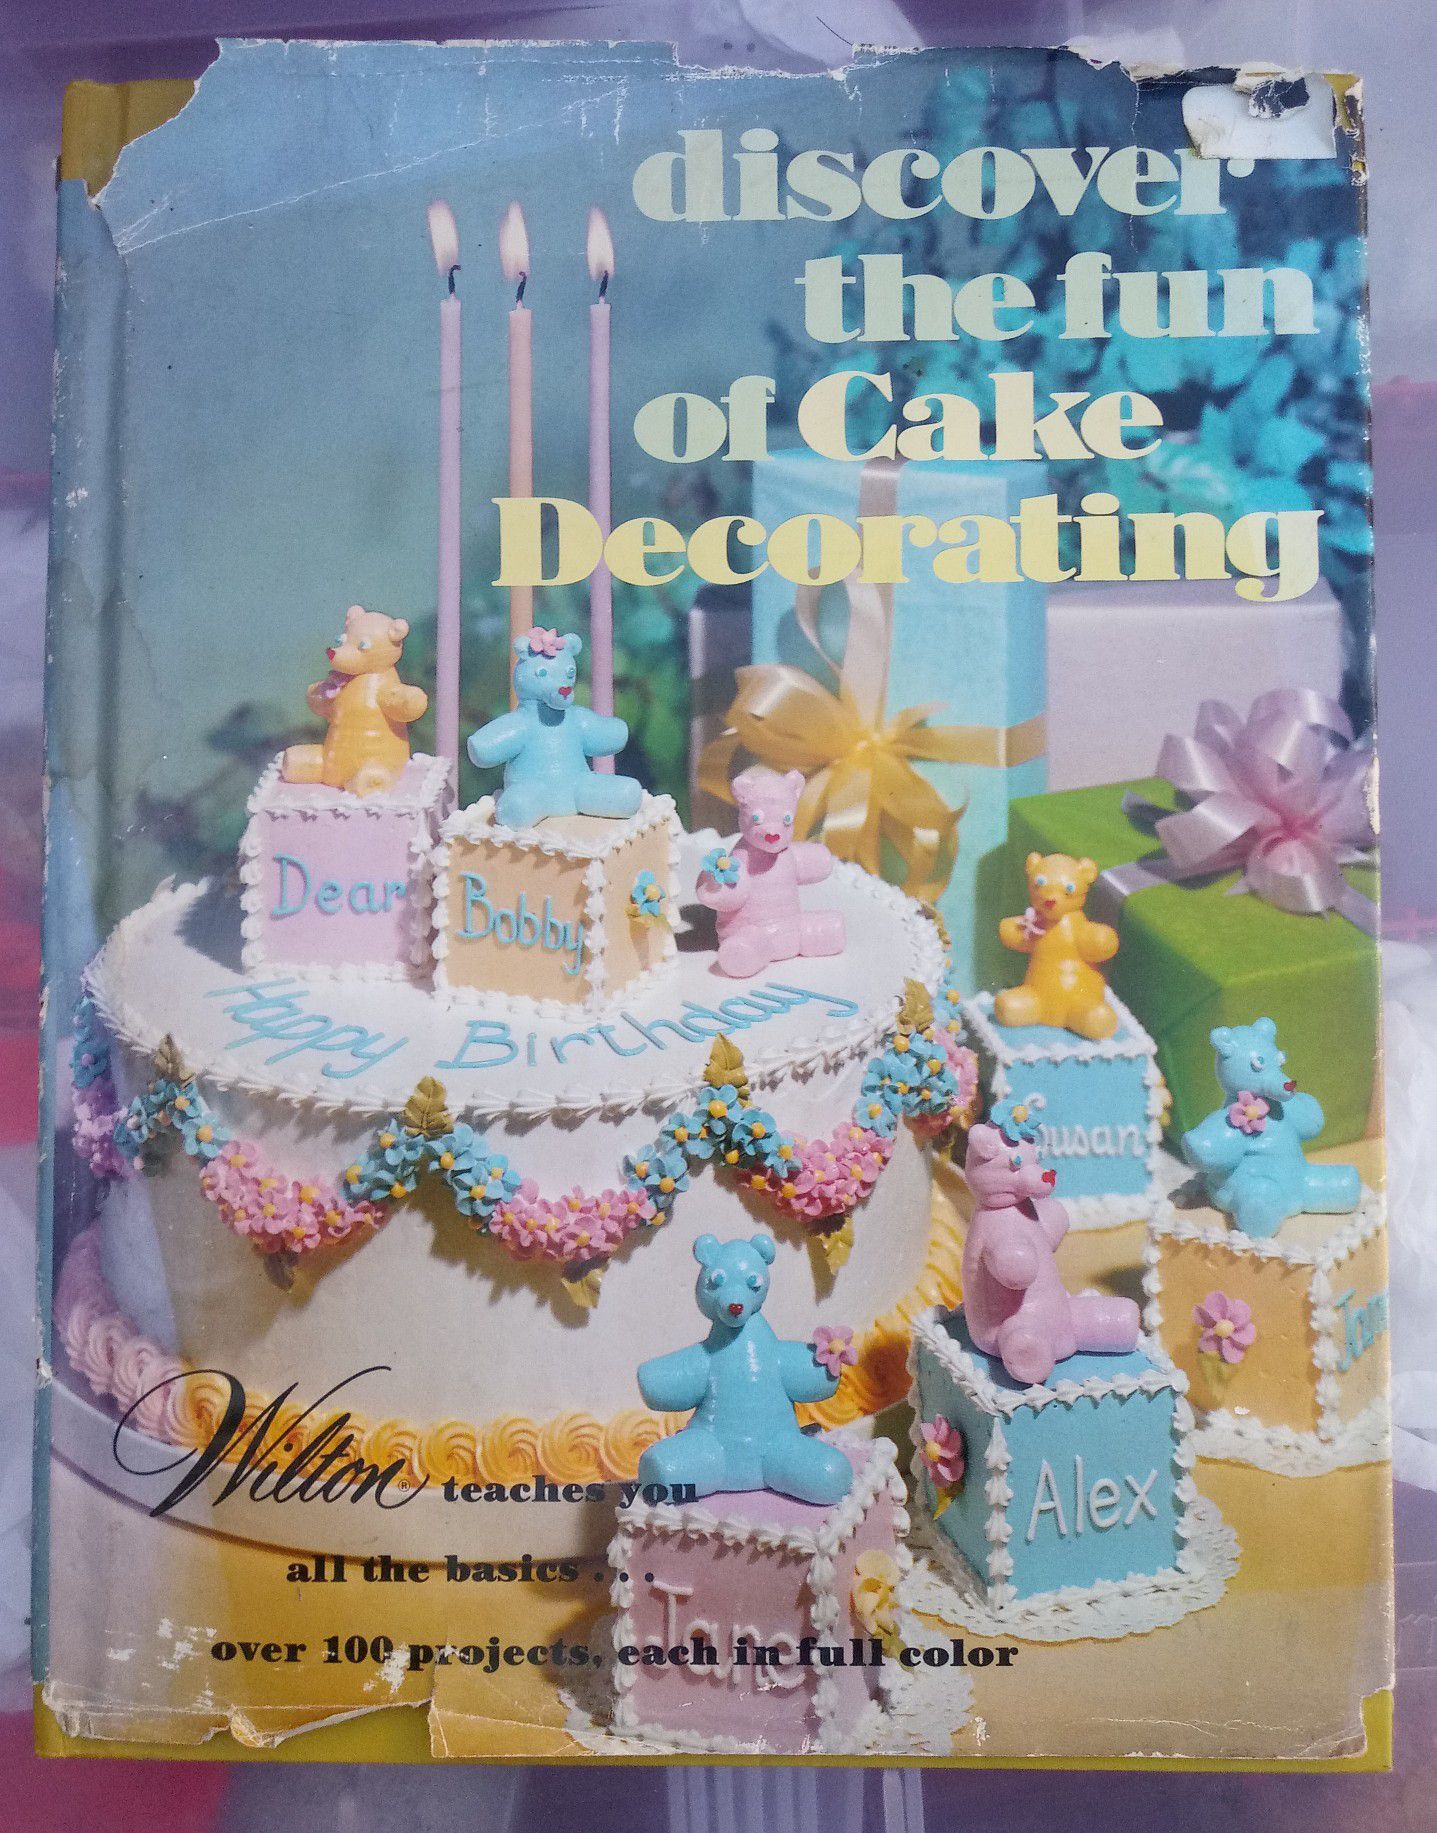 1979 Discover the fun of Cake Decorating